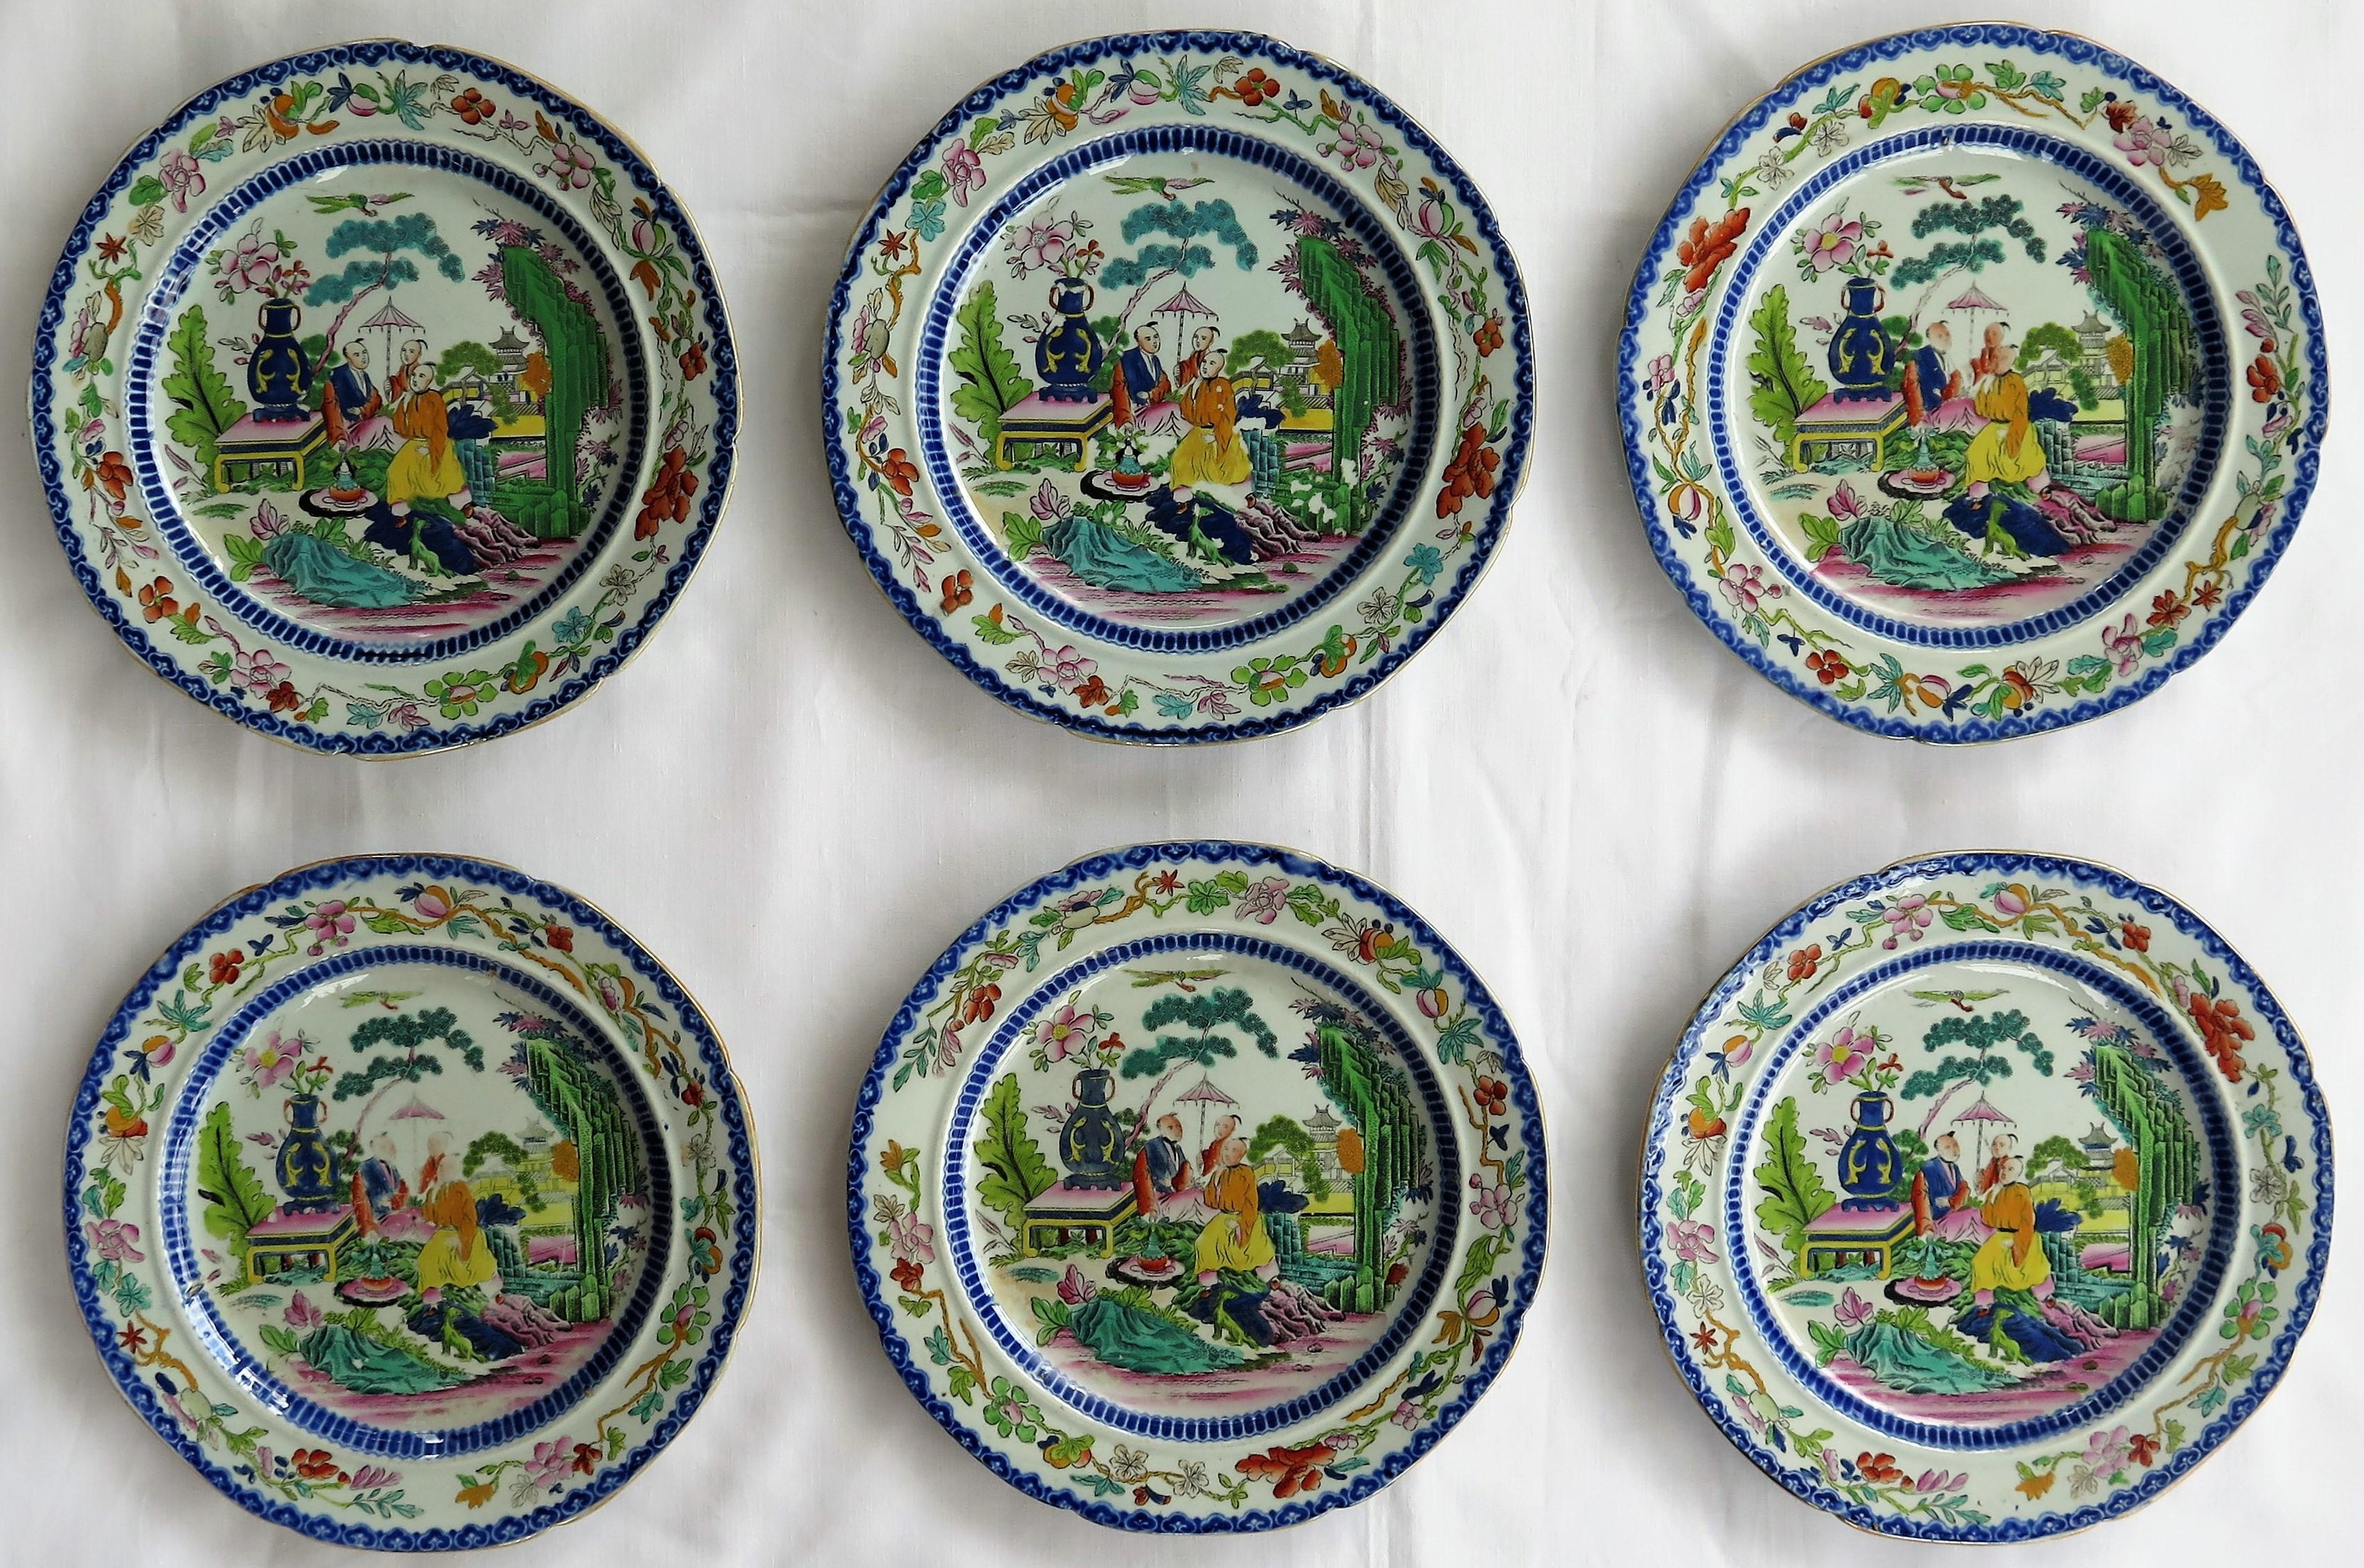 This is a very early set of six matching Mason's ironstone plates, all in the Mogul pattern and dating to the earliest period between 1813-1820. 

Sets of early plates in this pattern are rare. 

The plates are decorated in the chinoiserie Mogul